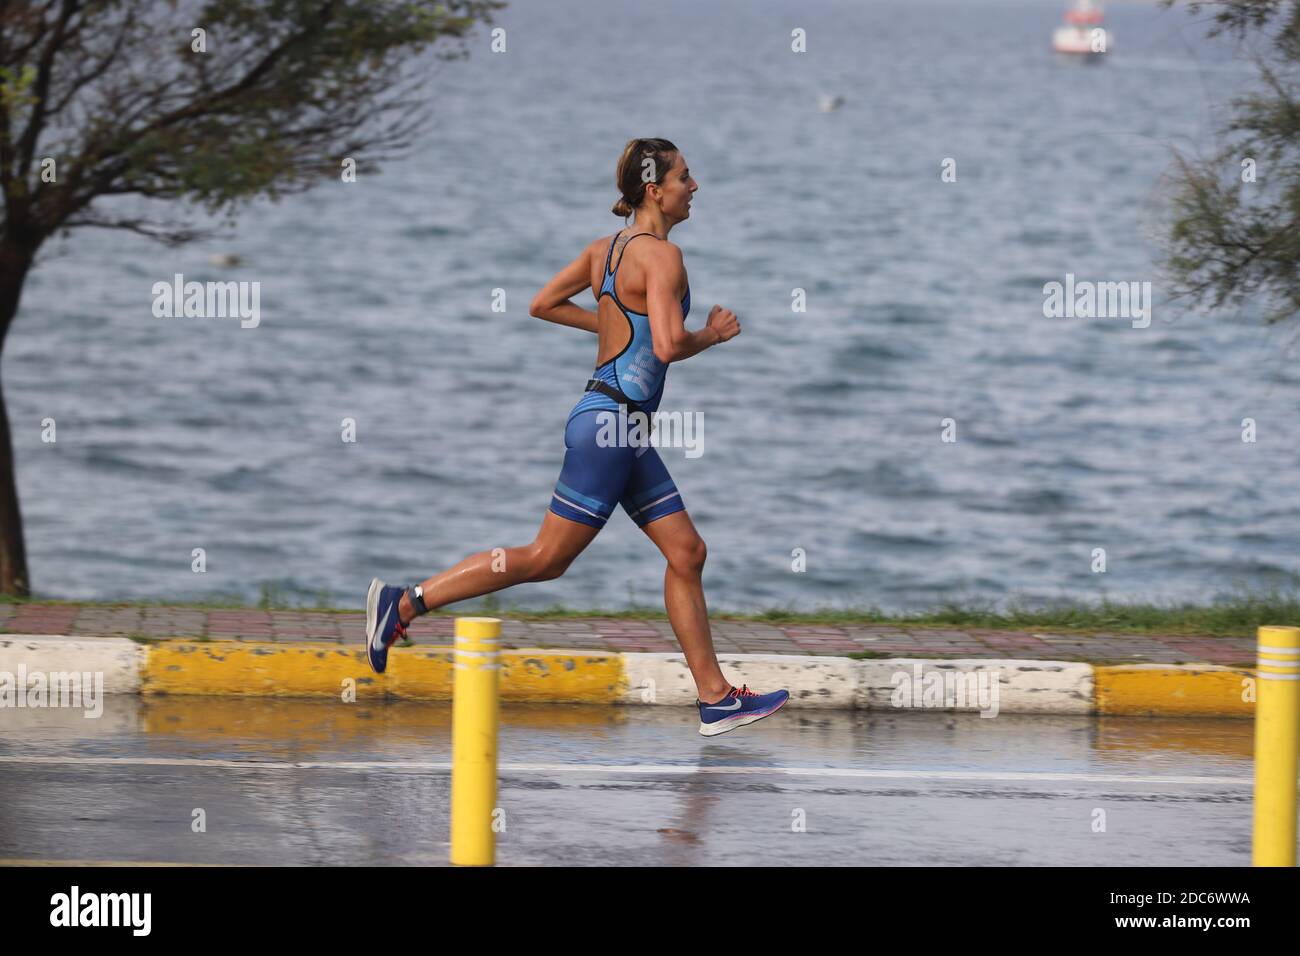 ISTANBUL, TURKEY - OCTOBER 18, 2020:  Undefined athlete competing in running component of Istanbul Sprint Triathlon Stock Photo